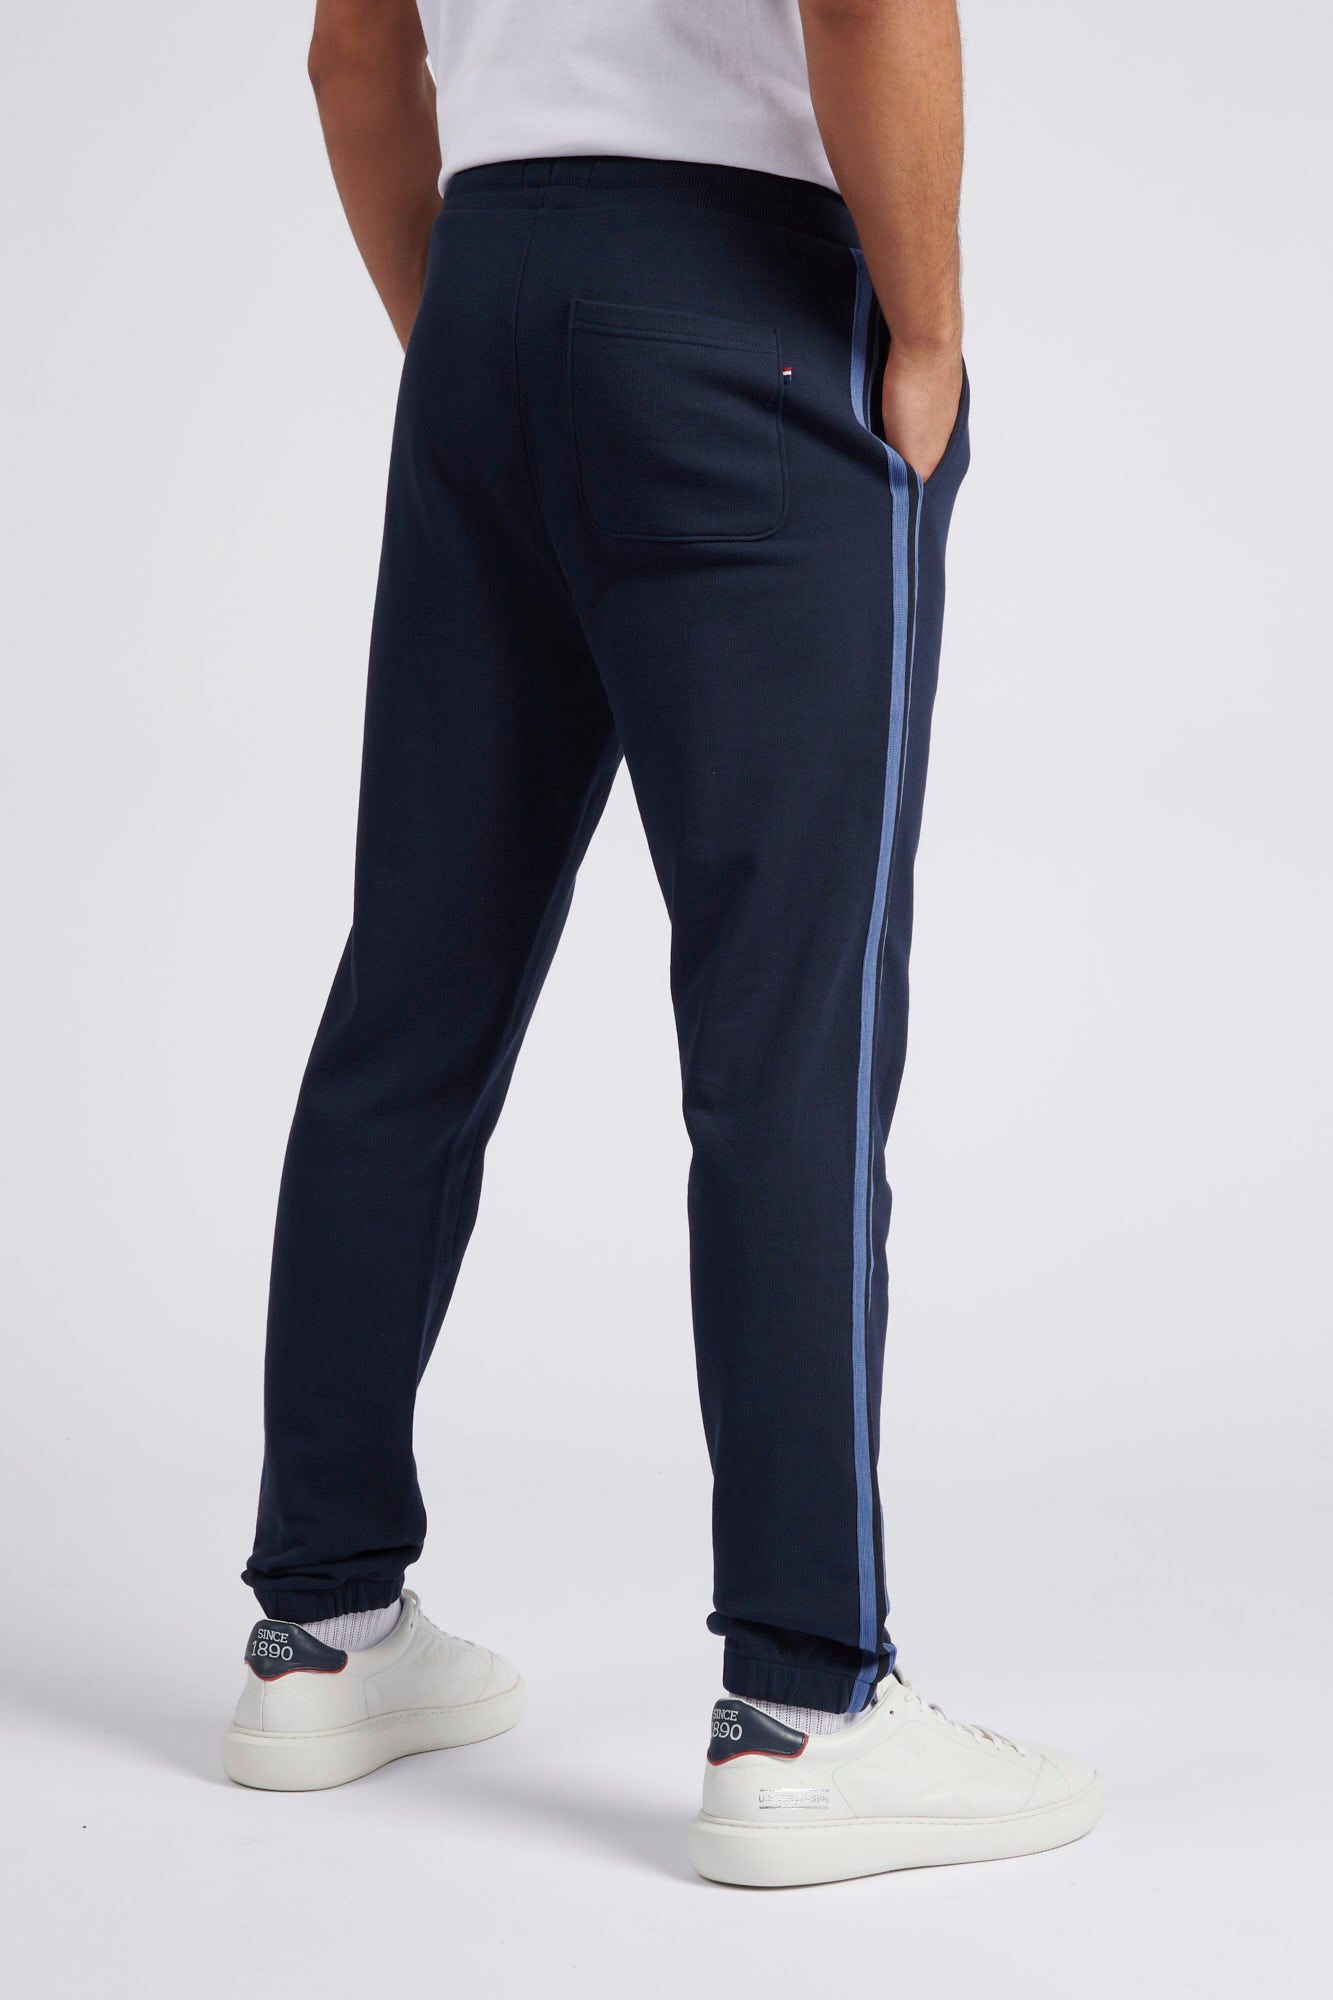 Mens Classic Fit Taped Joggers in Dark Sapphire Navy